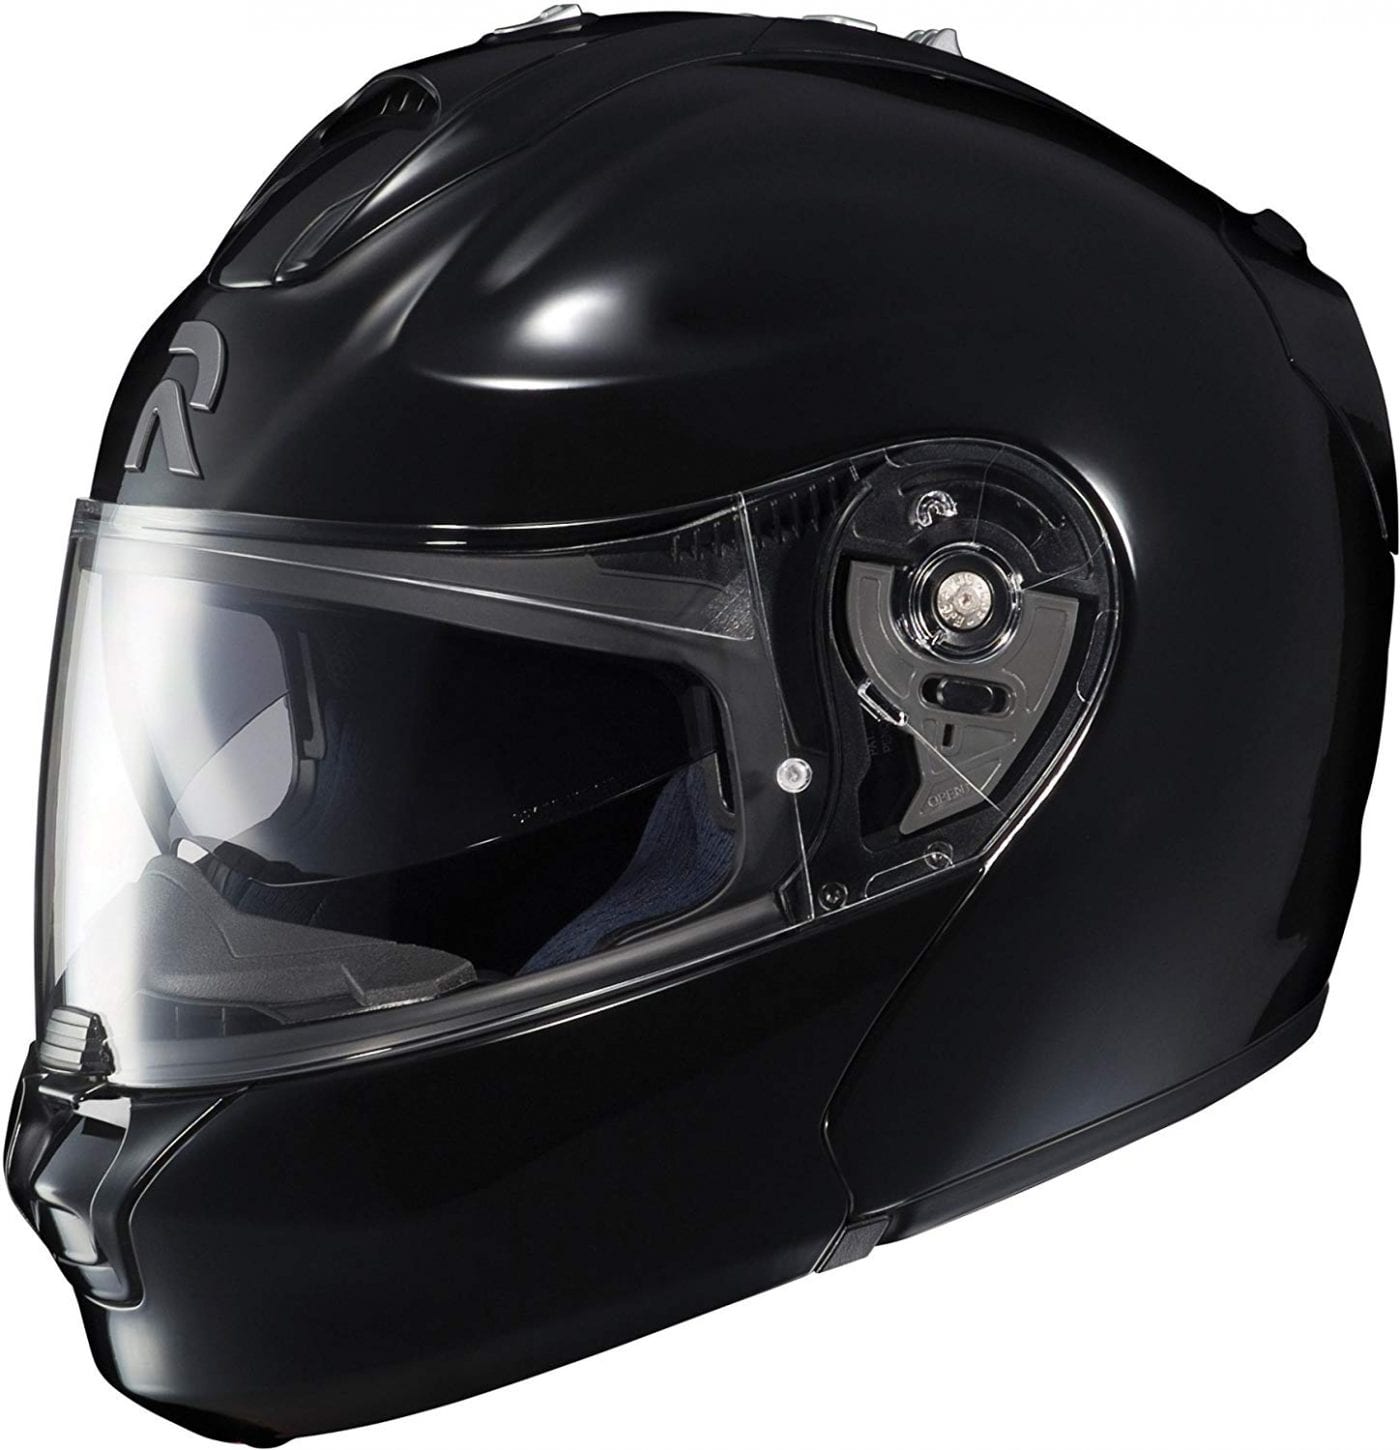 Top 8 Modular Motorcycle Helmets - Which one is the BEST?